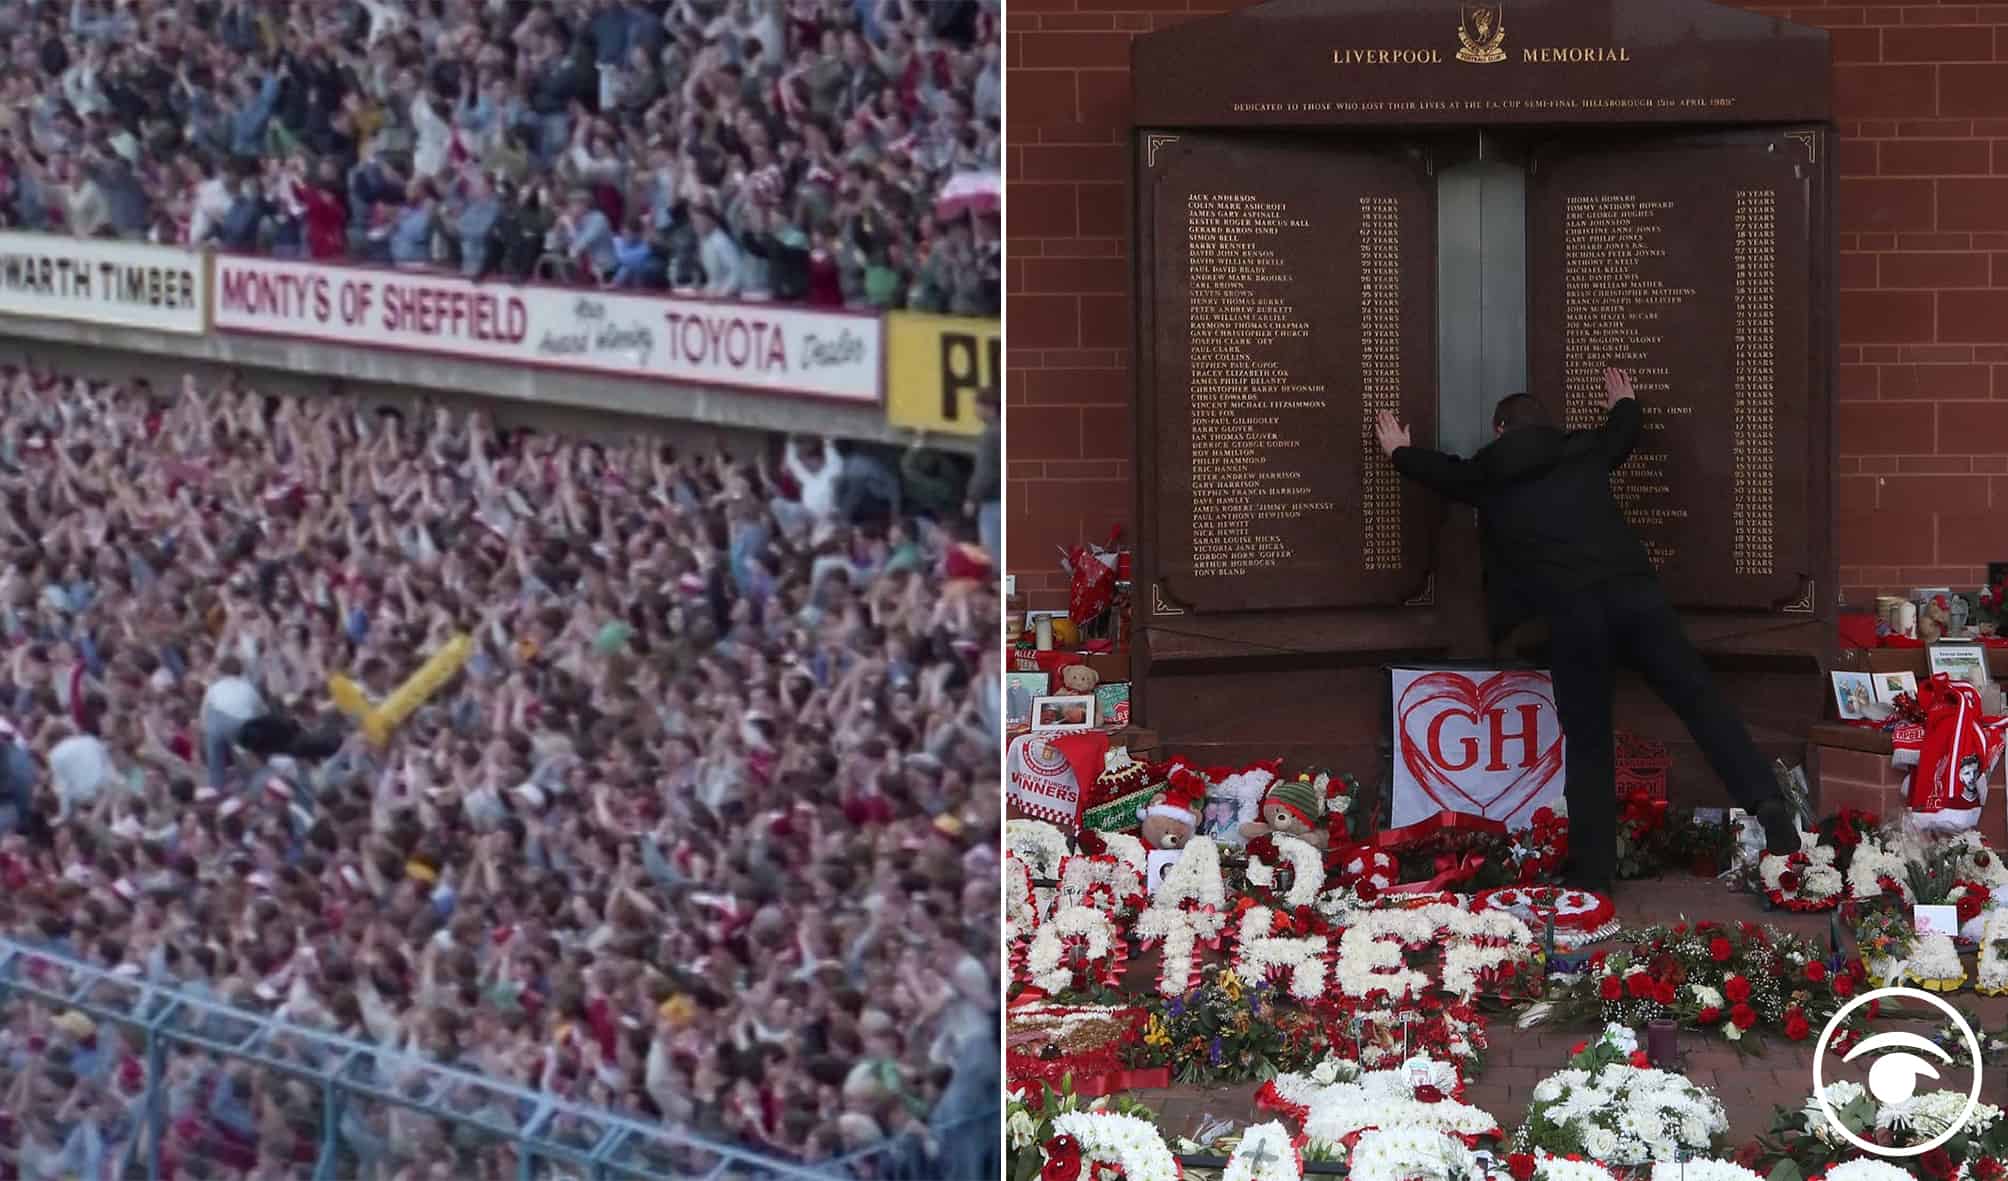 Hillsborough: Statement ‘amended to remove police criticism’ but comments about drunk football fans left in